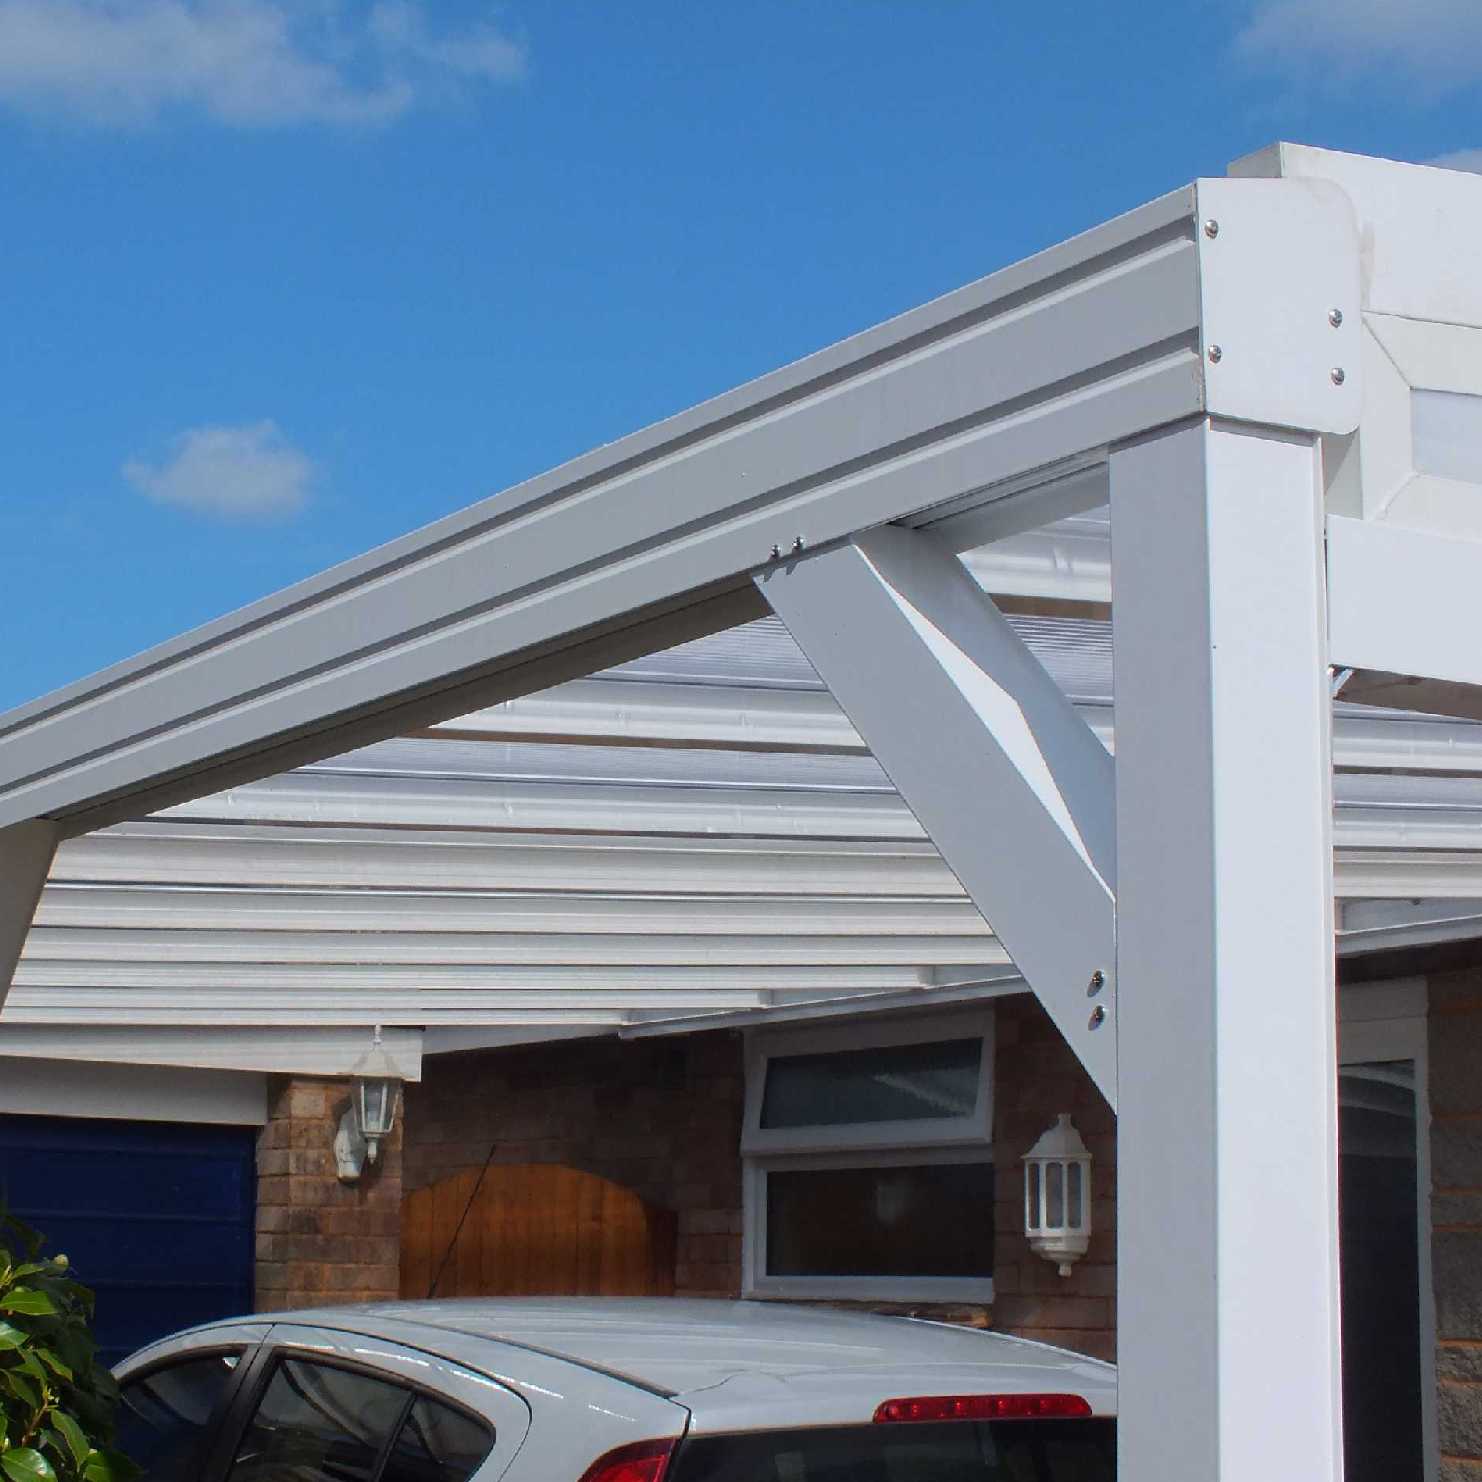 Buy Omega Smart Lean-To Canopy, White with 16mm Polycarbonate Glazing - 8.4m (W) x 1.5m (P), (4) Supporting Posts online today